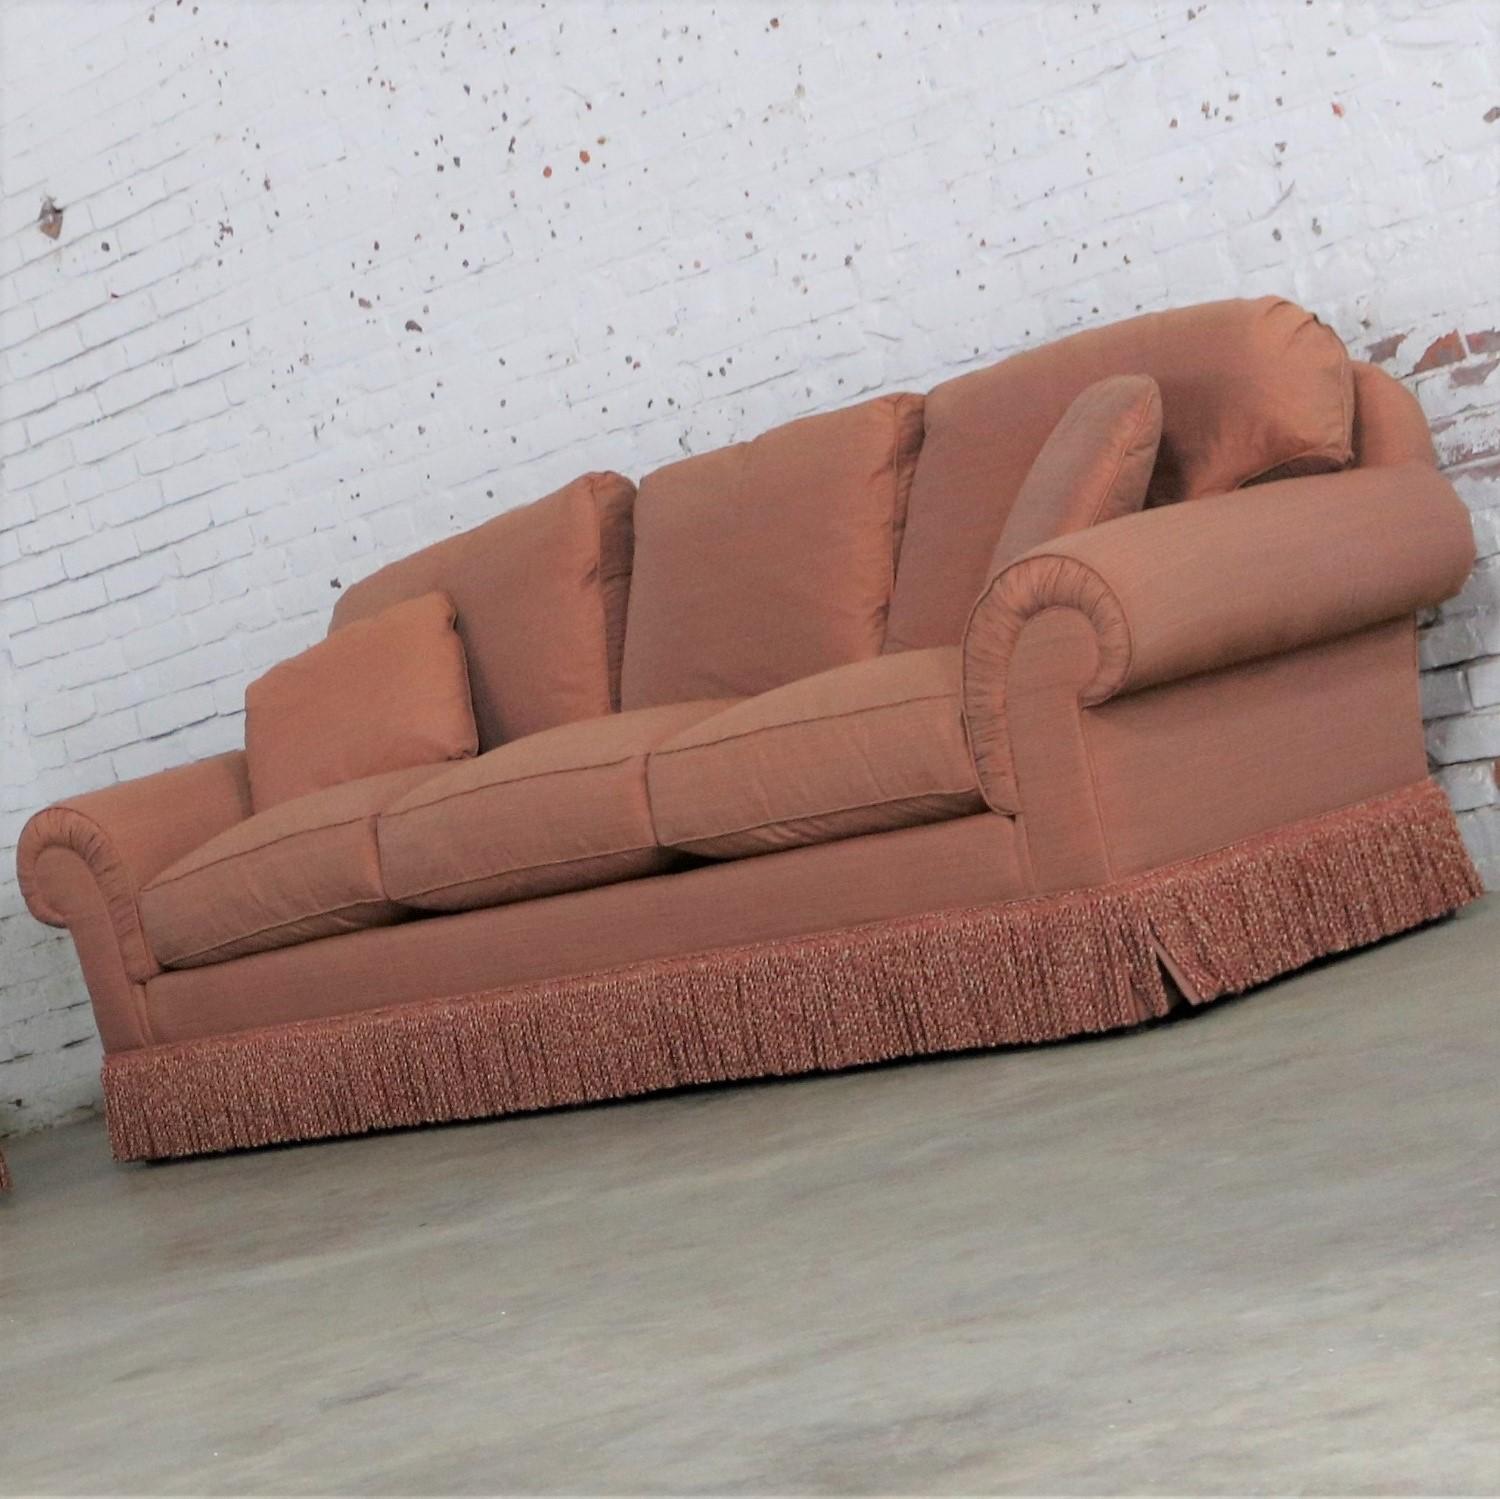 Beautiful Baker Furniture Lawson style sofa from  their Crown and Tulip Collection in a gorgeous terracotta / peach / coral colored ribbed tight weave taffeta-like heavy upholstery fabric with bouillon fringe and poly / feather / down pillows and